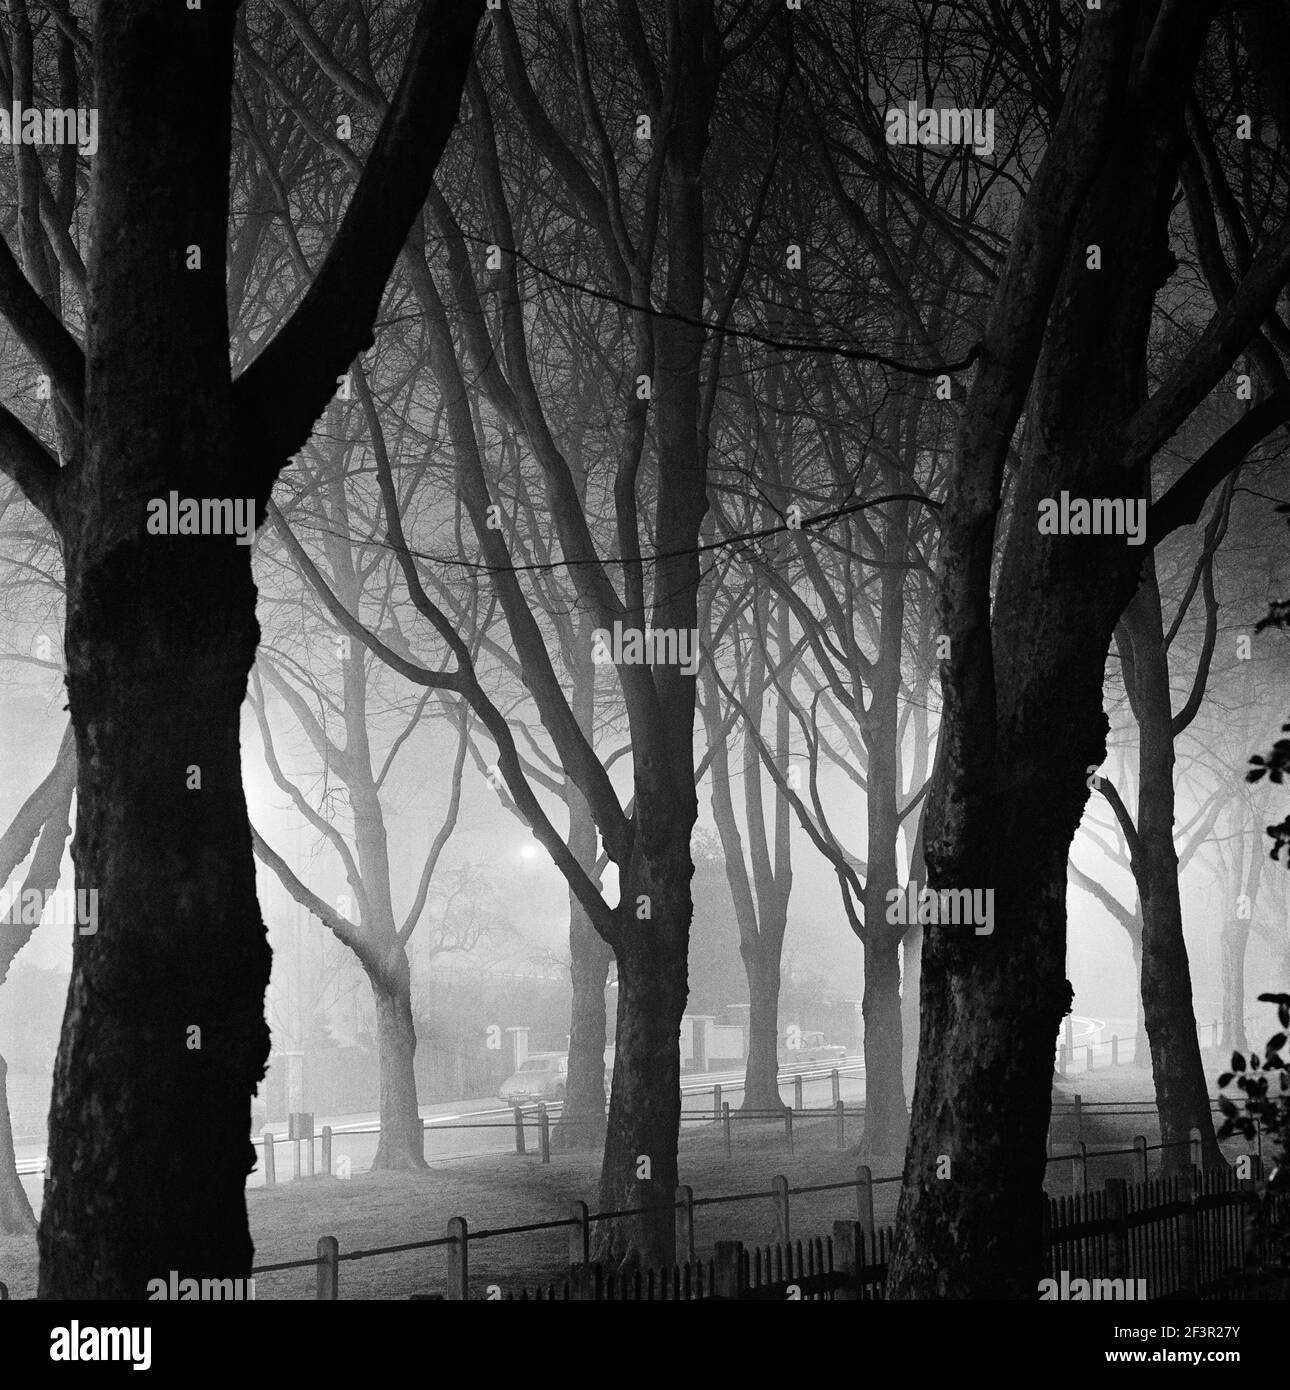 SOUTH END ROAD, Hampstead, London. Looking north-west through trees and fences in the mist towards South End Road, with lit street lights and houses. Stock Photo